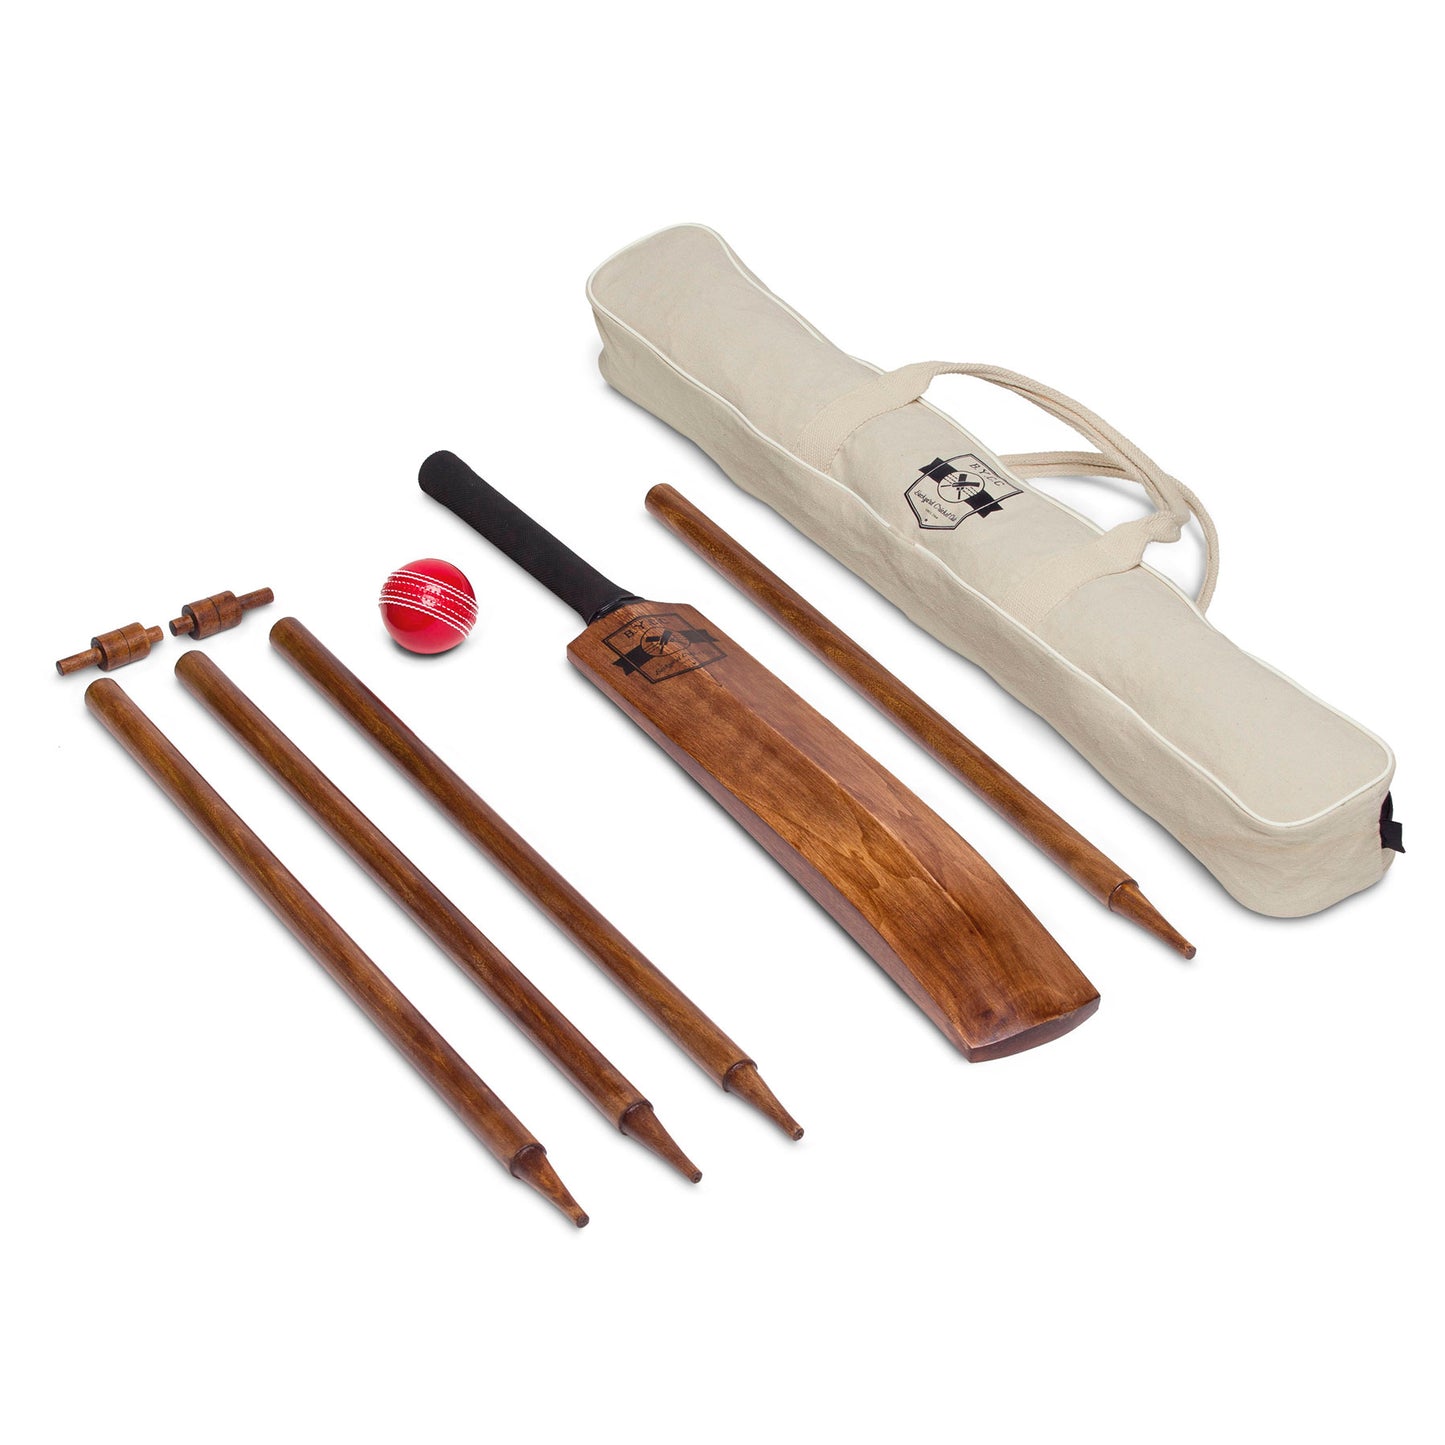 antique timber cricket set with stumps, bat, cricket ball in a canvas carry bag with handles